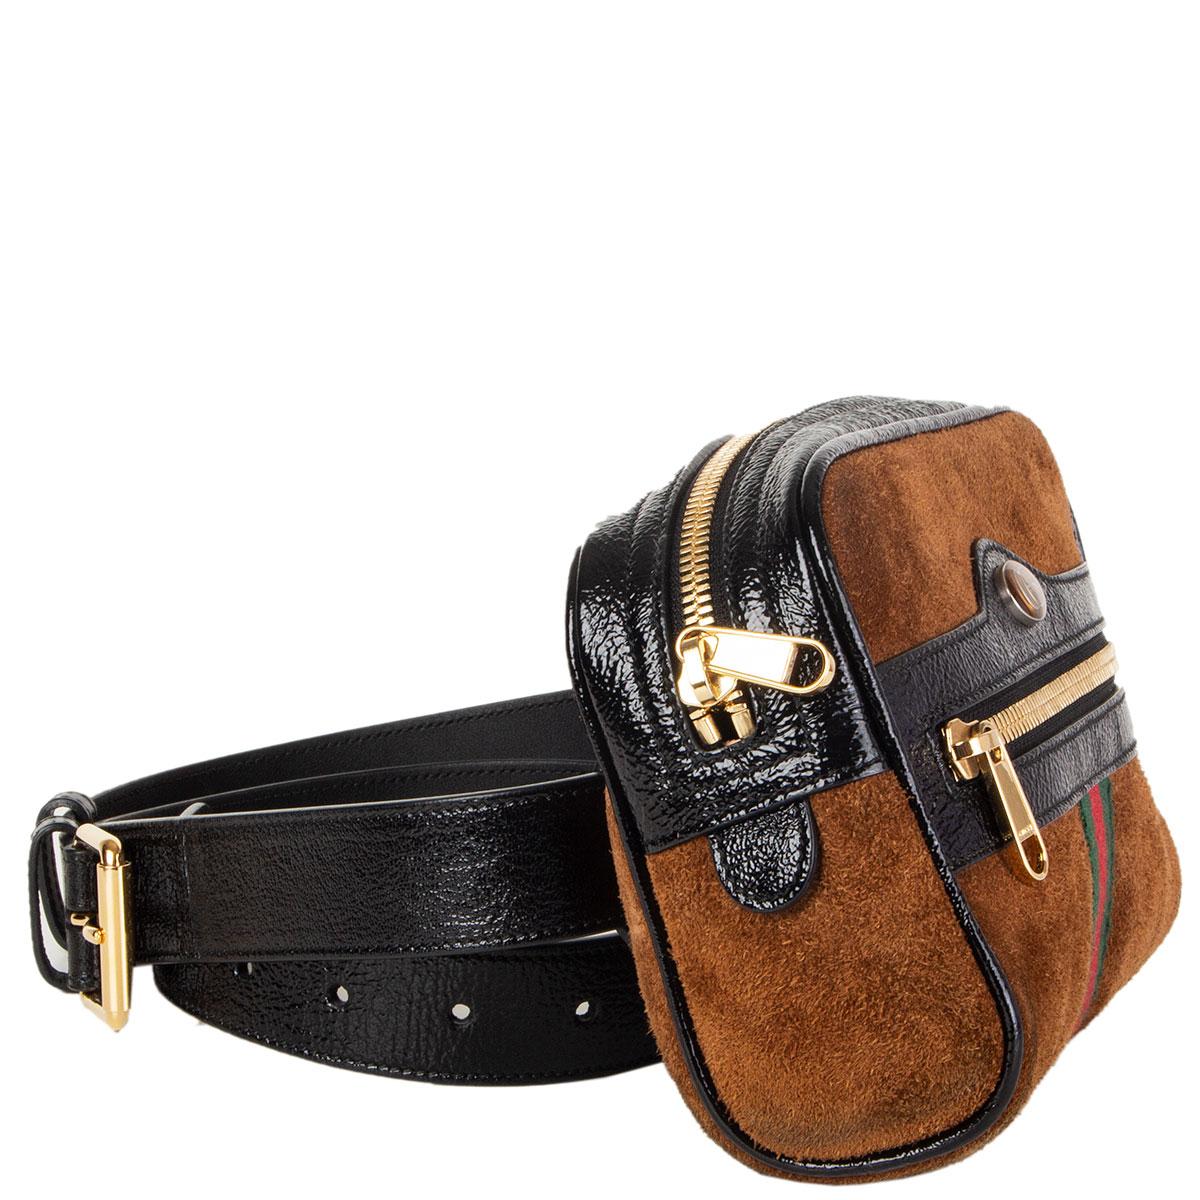 Gucci 'Ophidia' fanny pack in coffee brown suede and black crackled patent leather featuring green and red classic web stripe. Has a zipper front pocket and is lined in nude microfibre with one open pocket against the back. Has been worn with signs